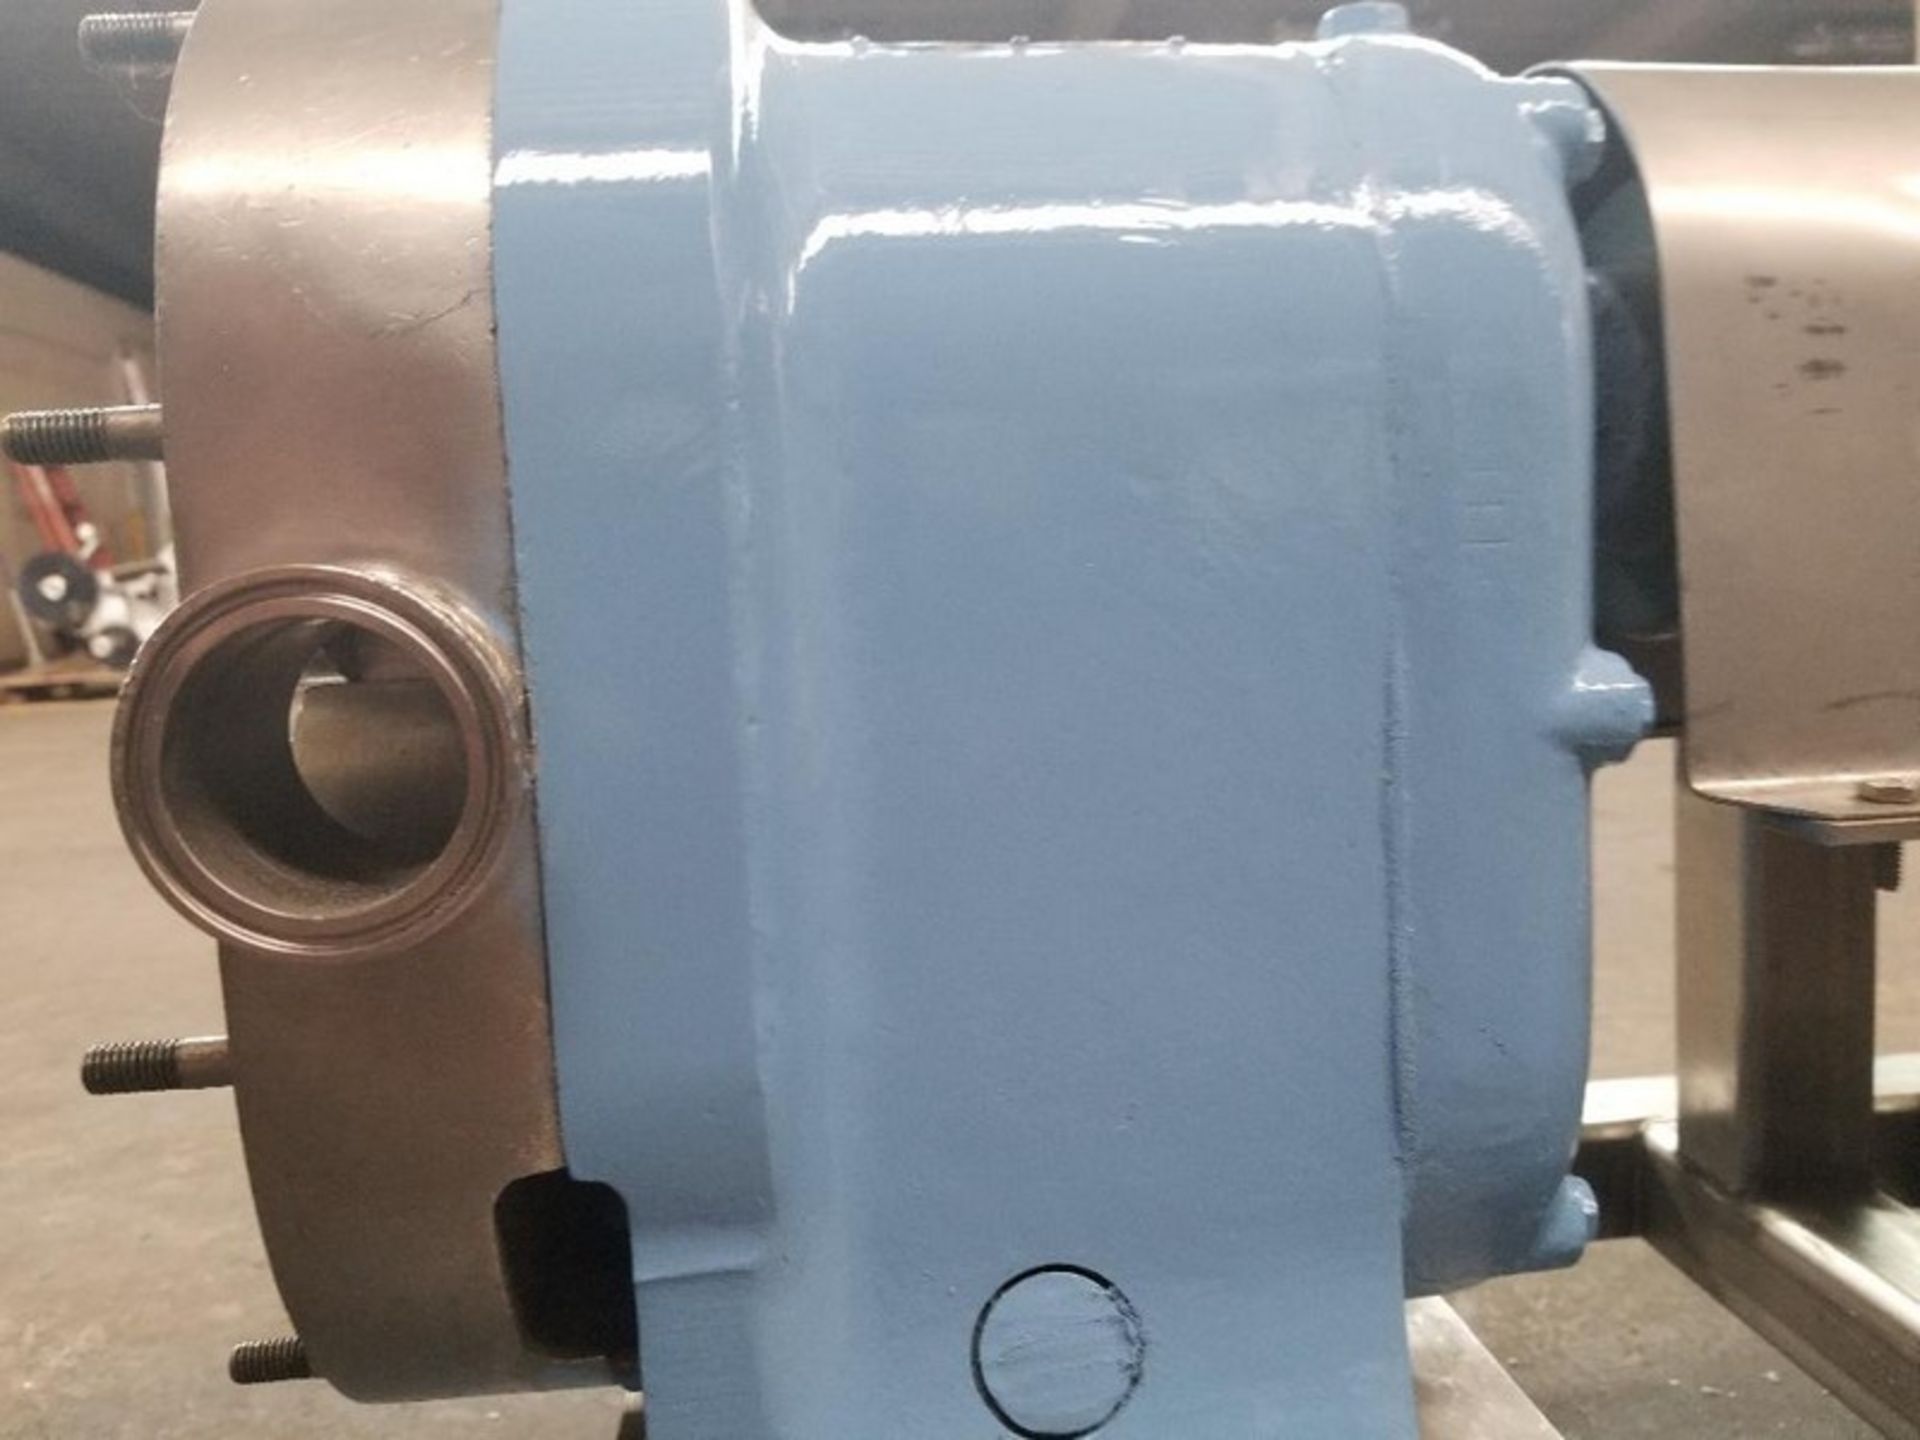 Waukesha 5 hp S/S Positive Displacement Pump with 2-1/2" Tri-Clamp Inlet and Outlet, 230/460 V - Image 7 of 9